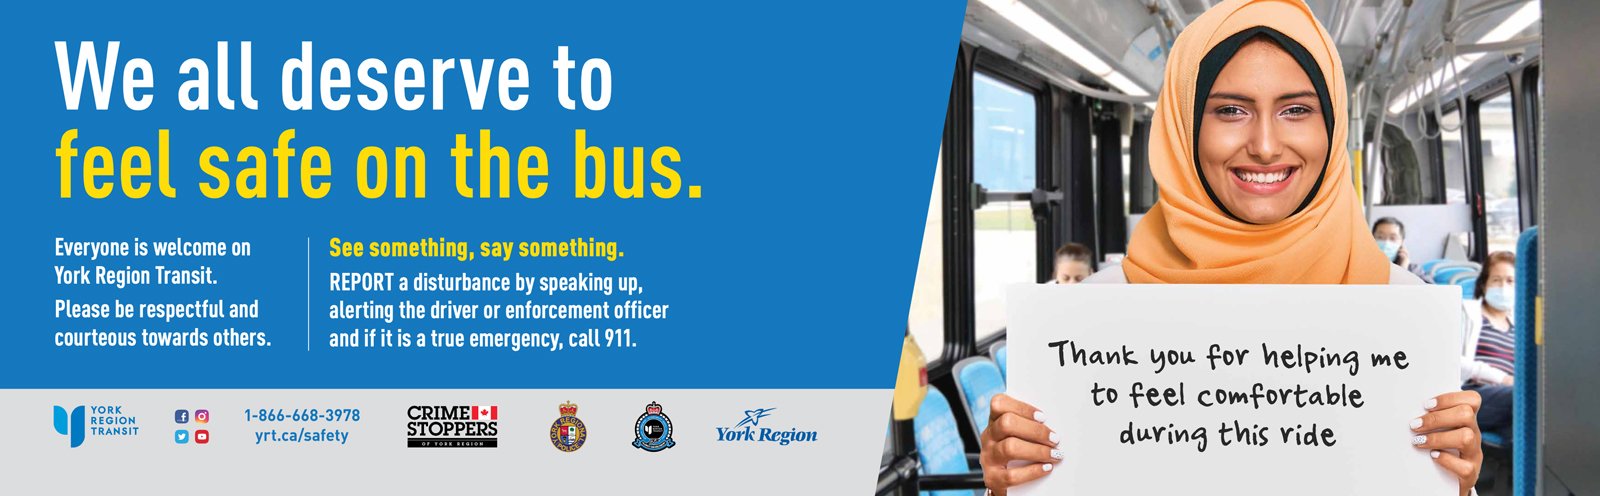 image of the Transit Safety Campaign advertisement